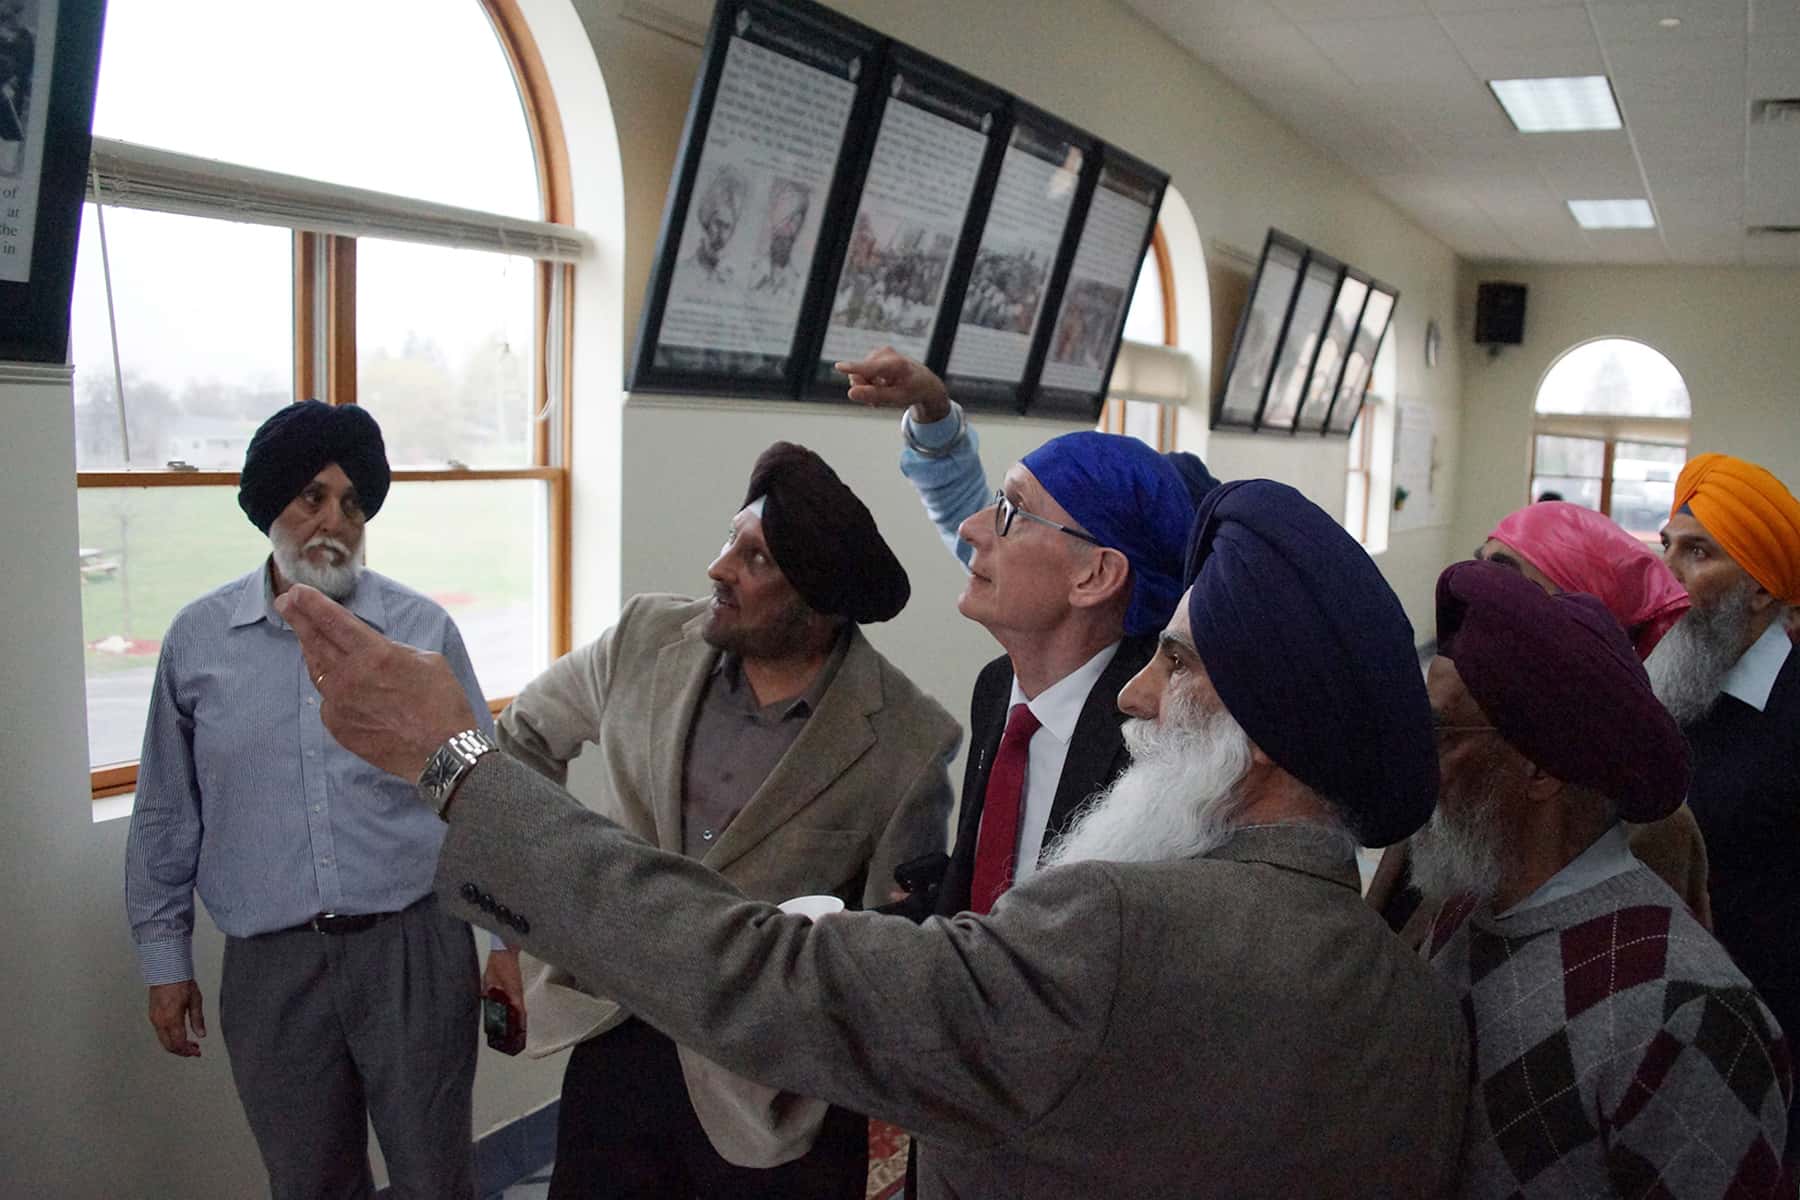 02_043019_sikhtempleevers_0922